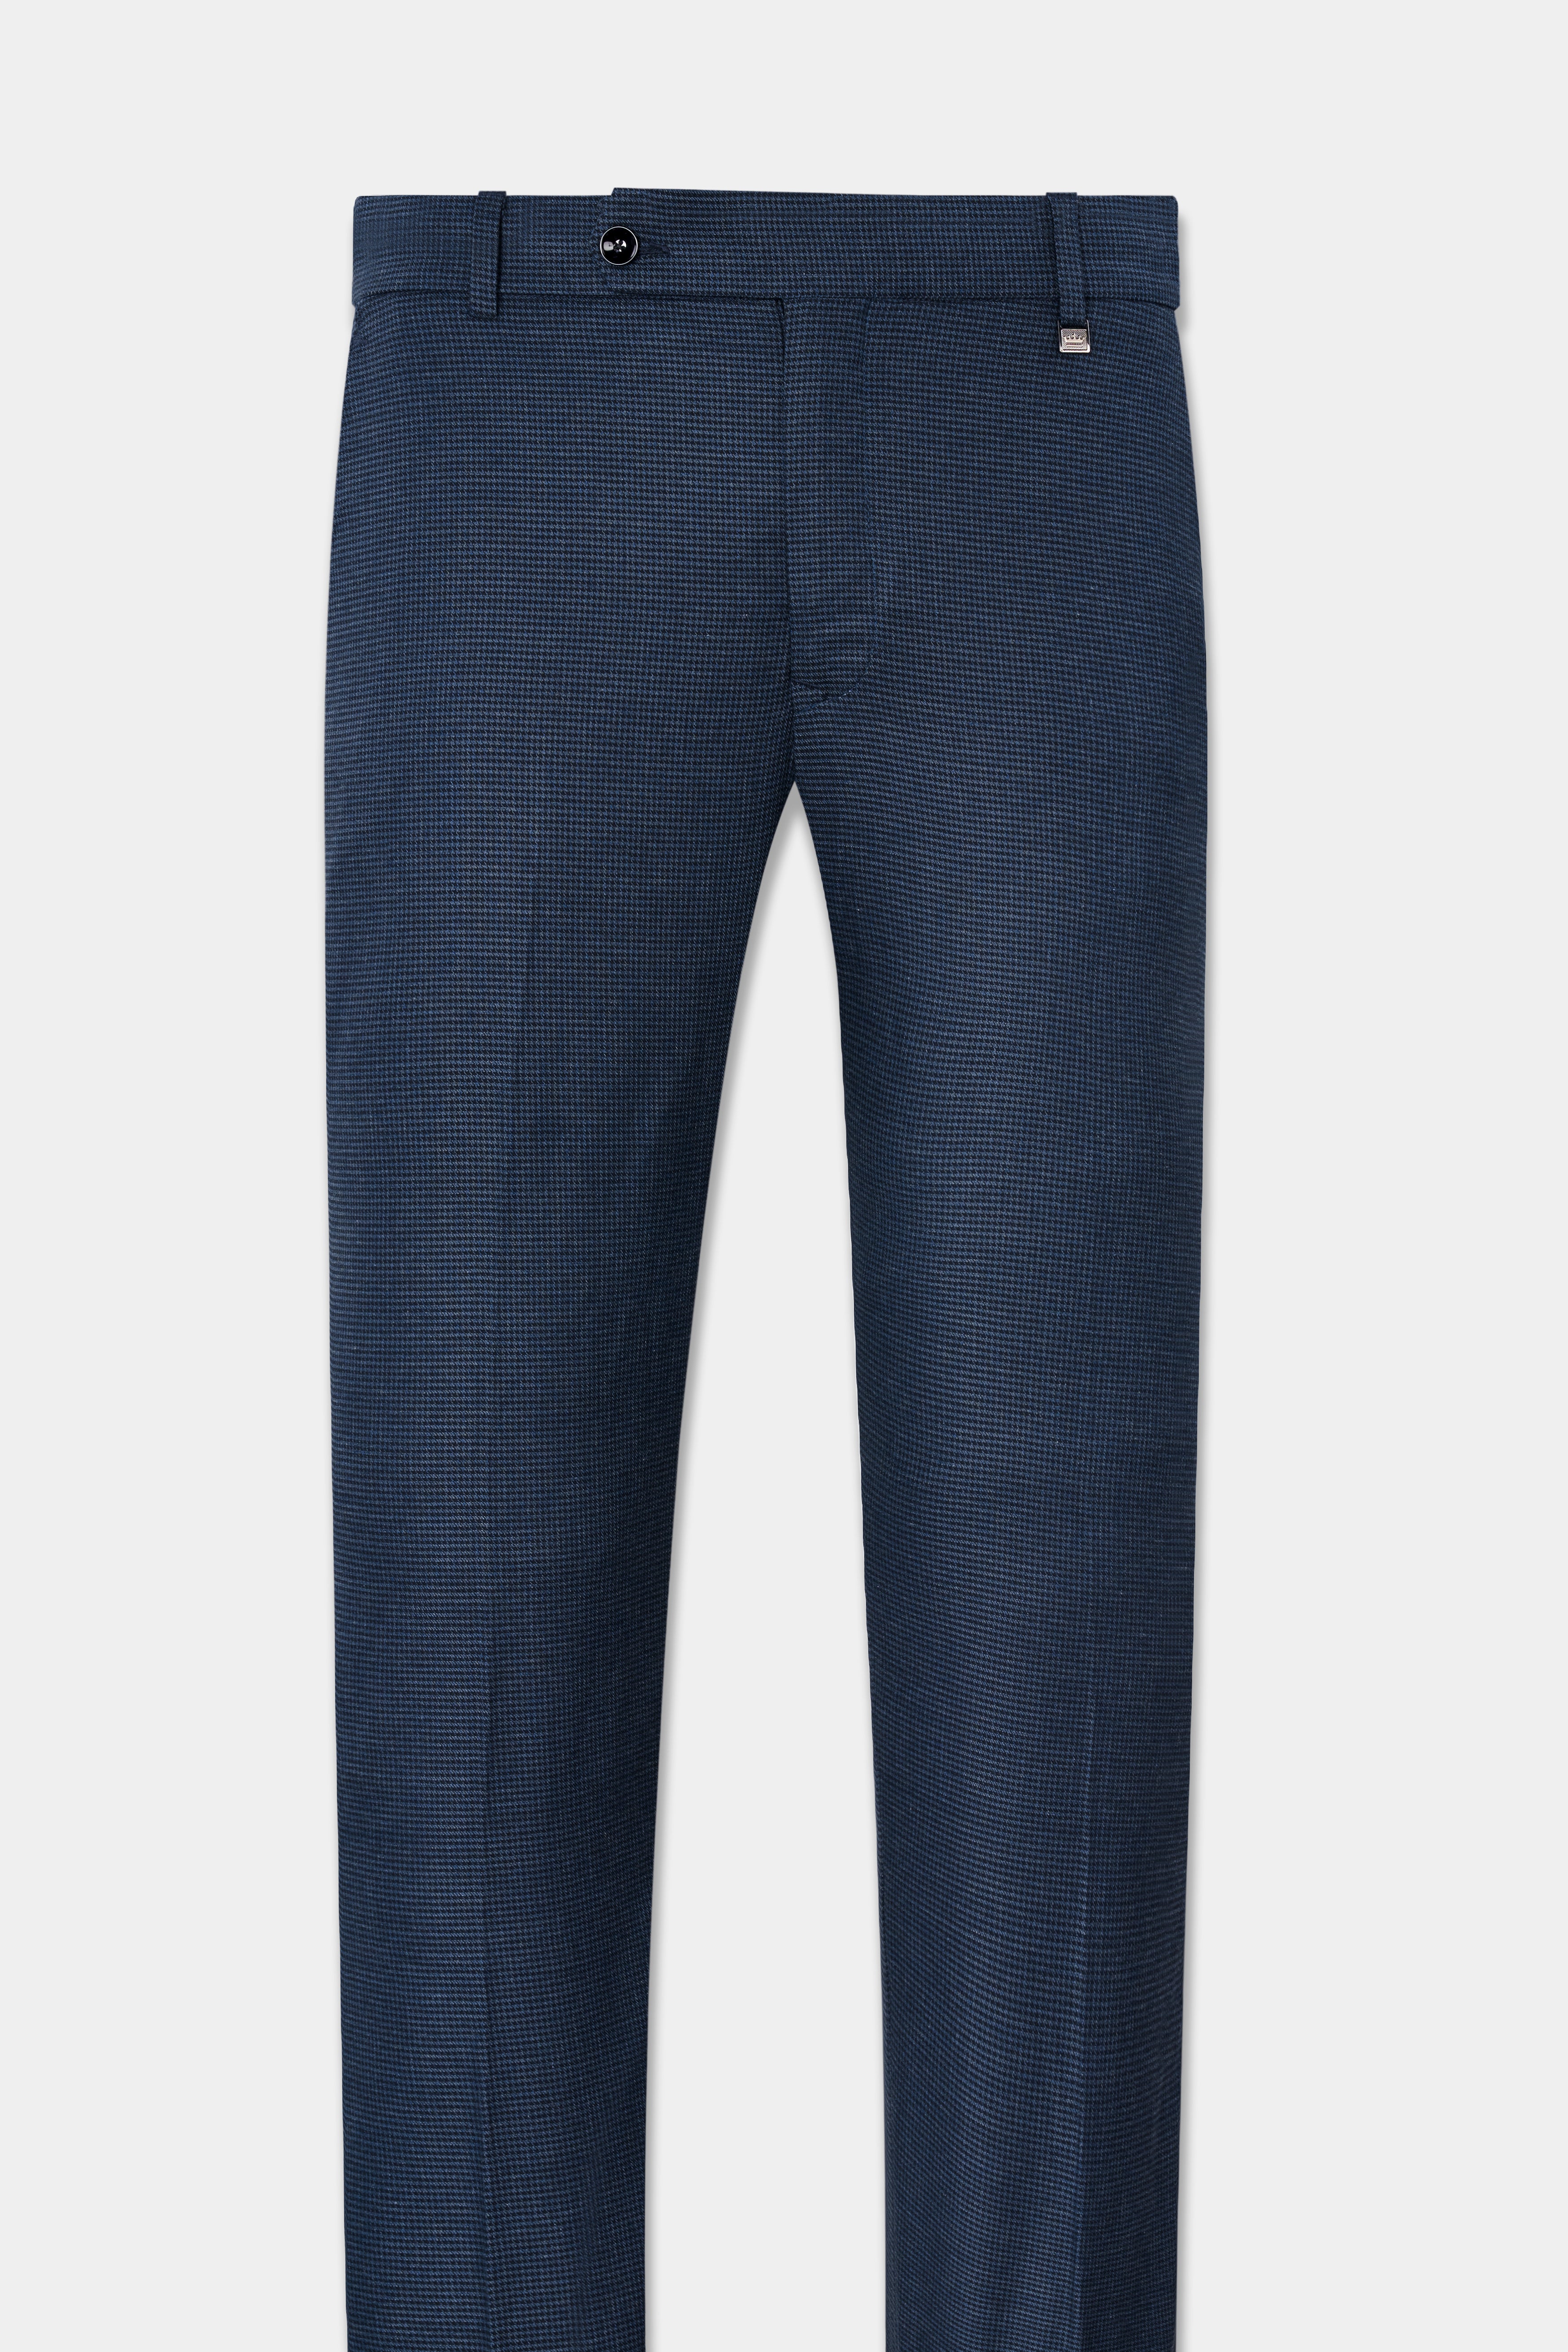 Limed Spruce Blue Wool Rich Pant With Houndstooth Pattern T2824-28, T2824-30, T2824-32, T2824-34, T2824-36, T2824-38, T2824-40, T2824-42, T2824-44